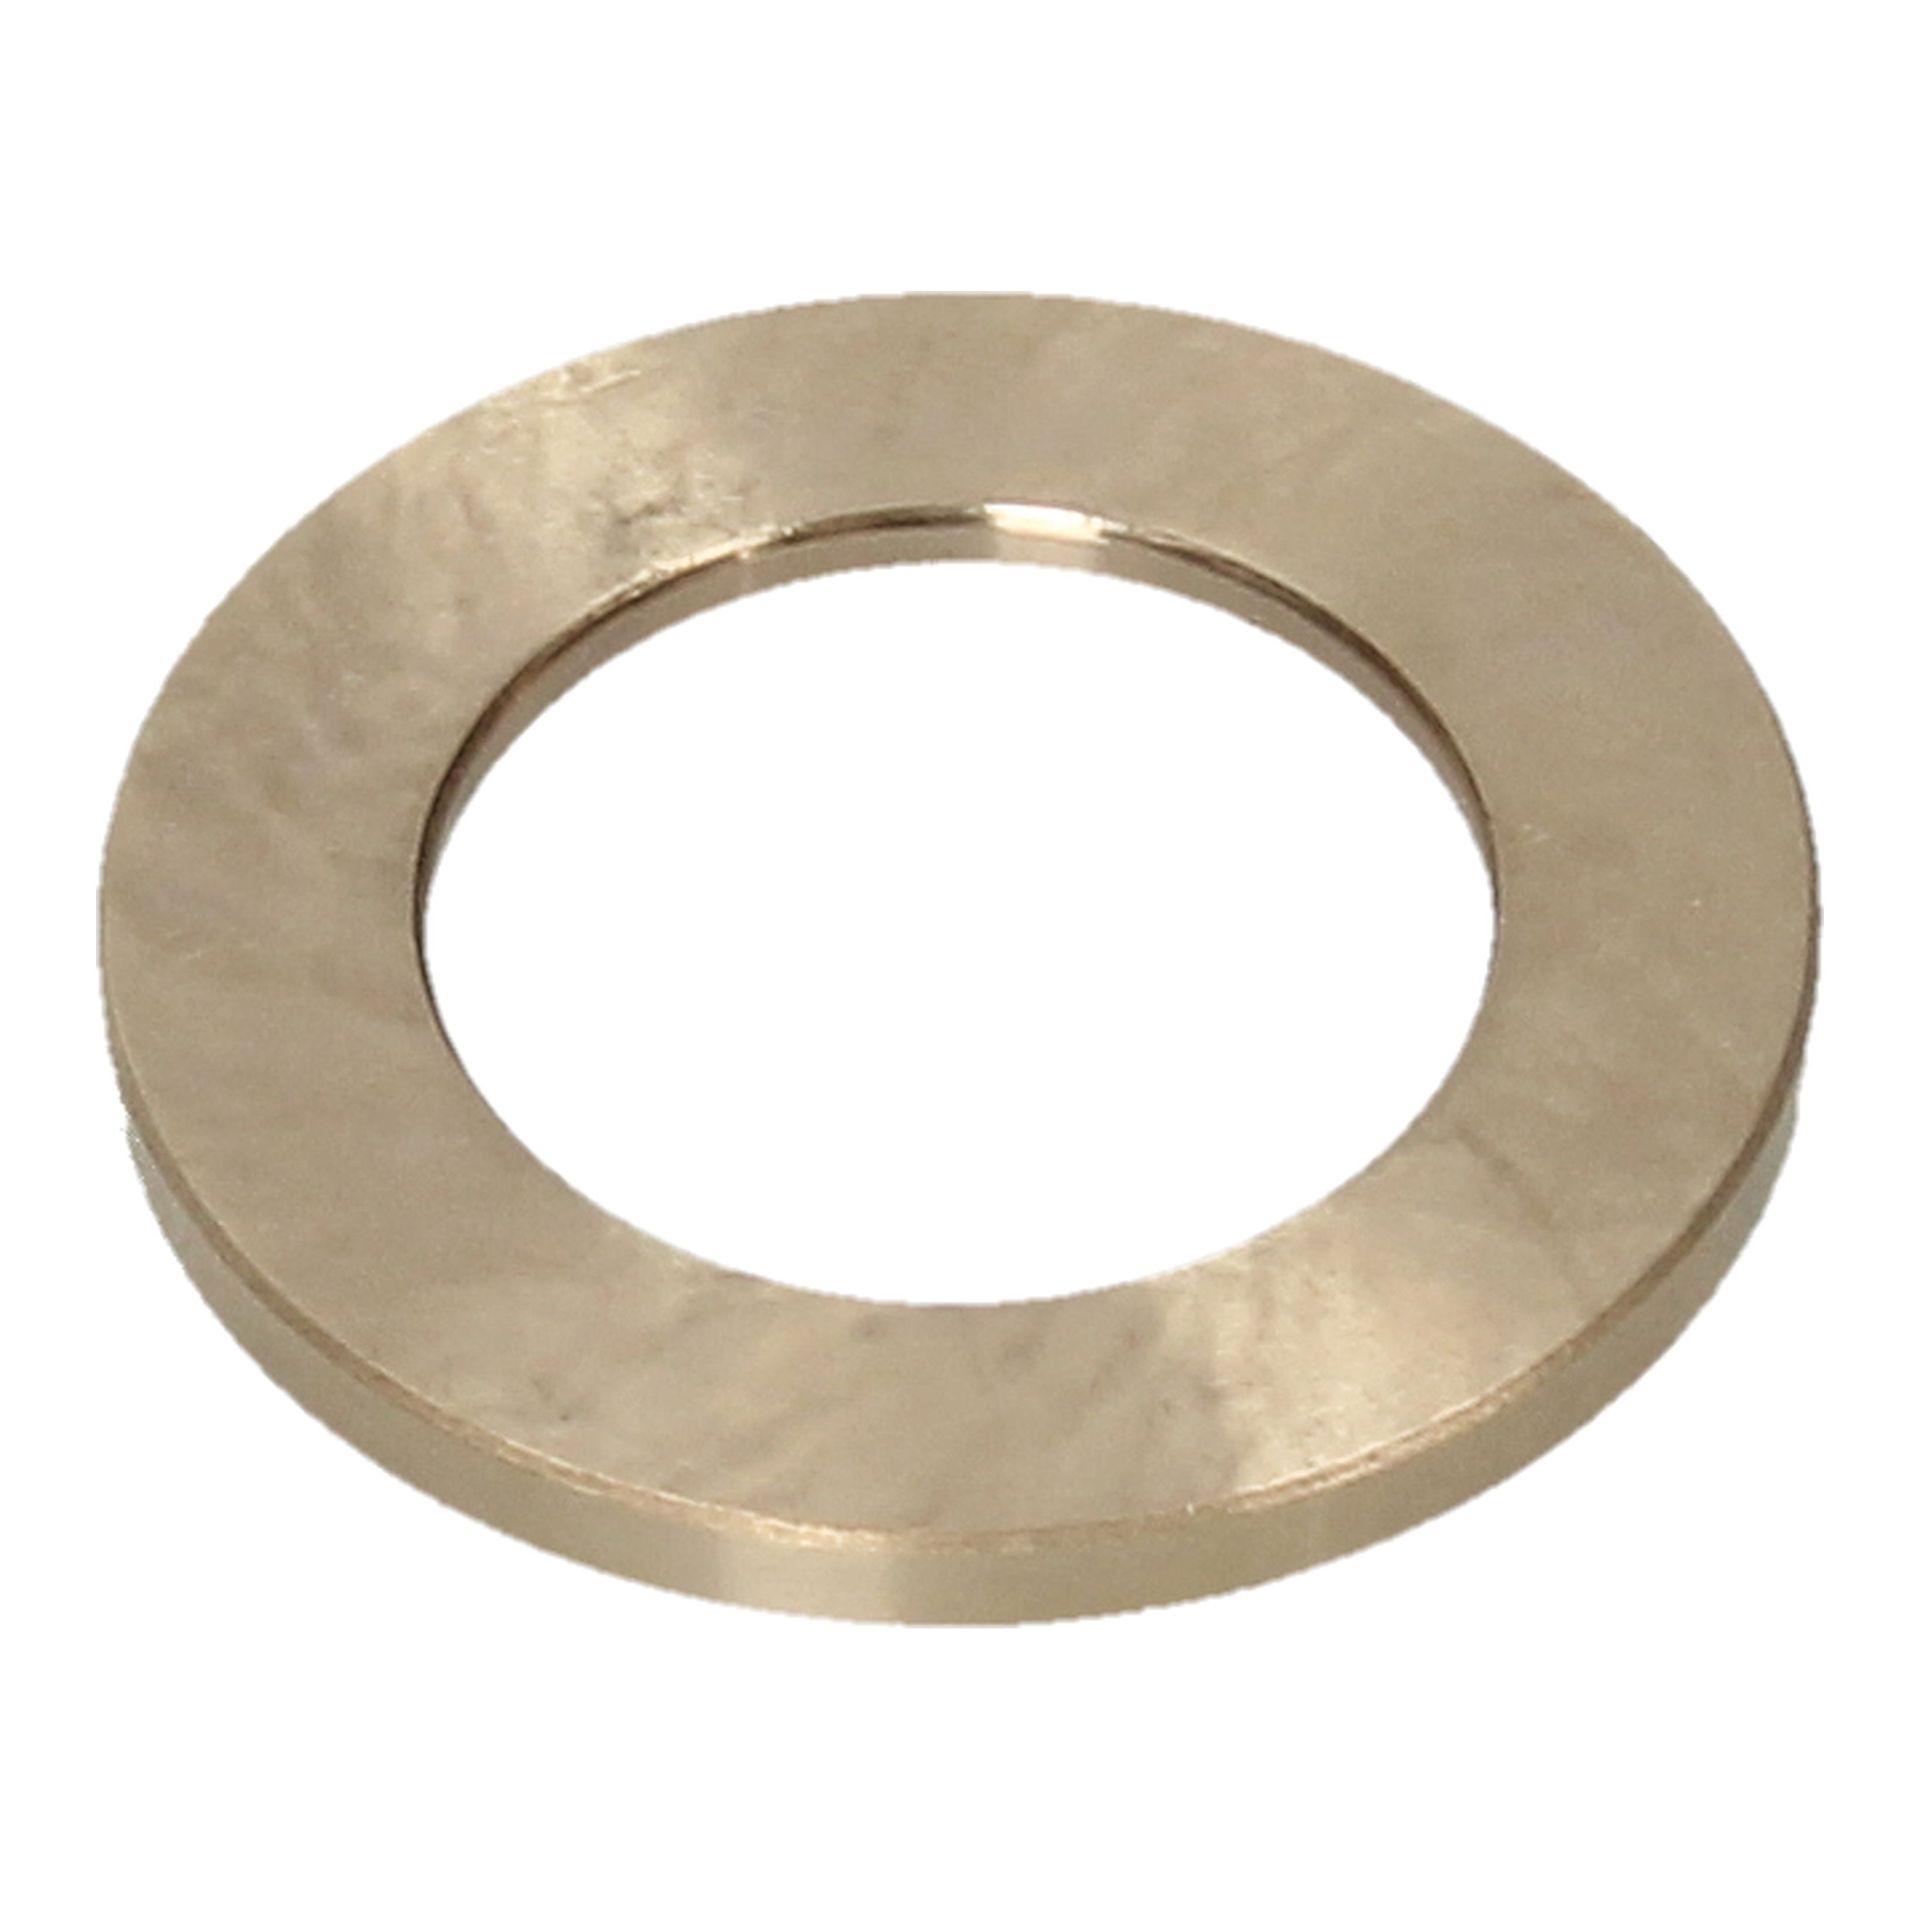 King Pin Lower Thrust Washer 2.0mm